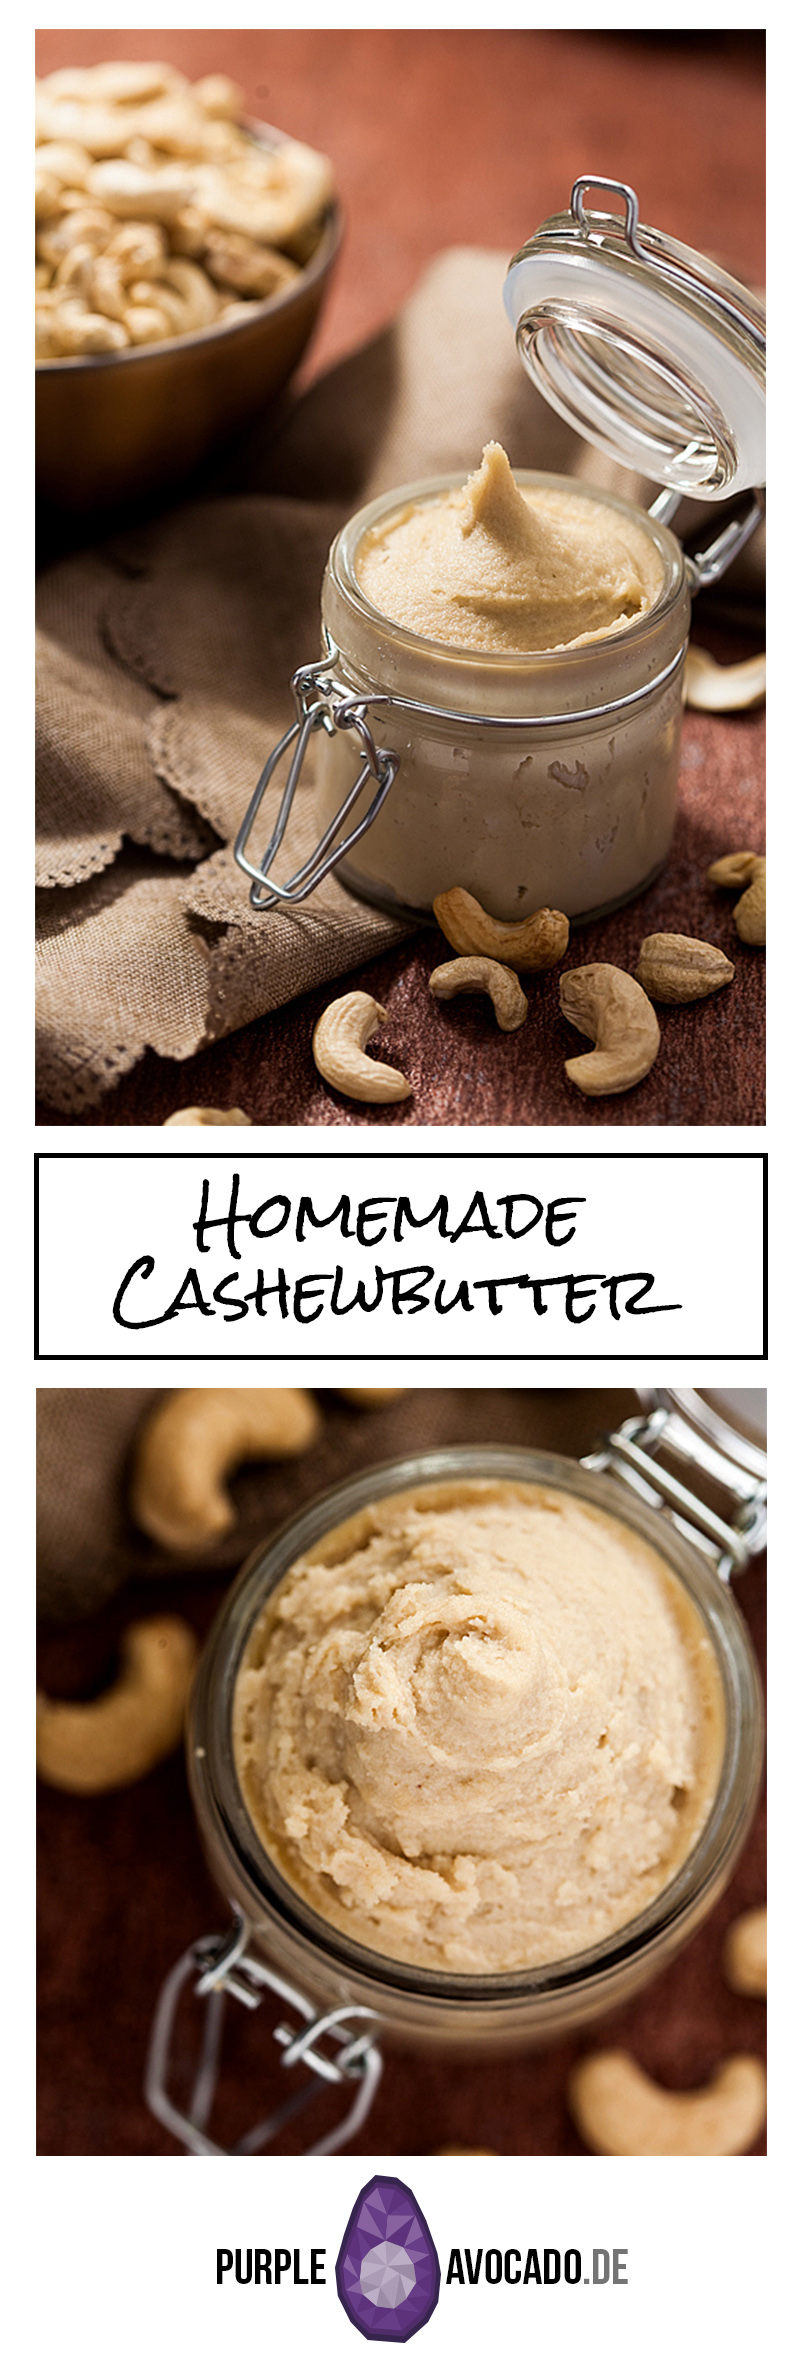 Recipe for Homemade Cashew Butter and its amazing variability